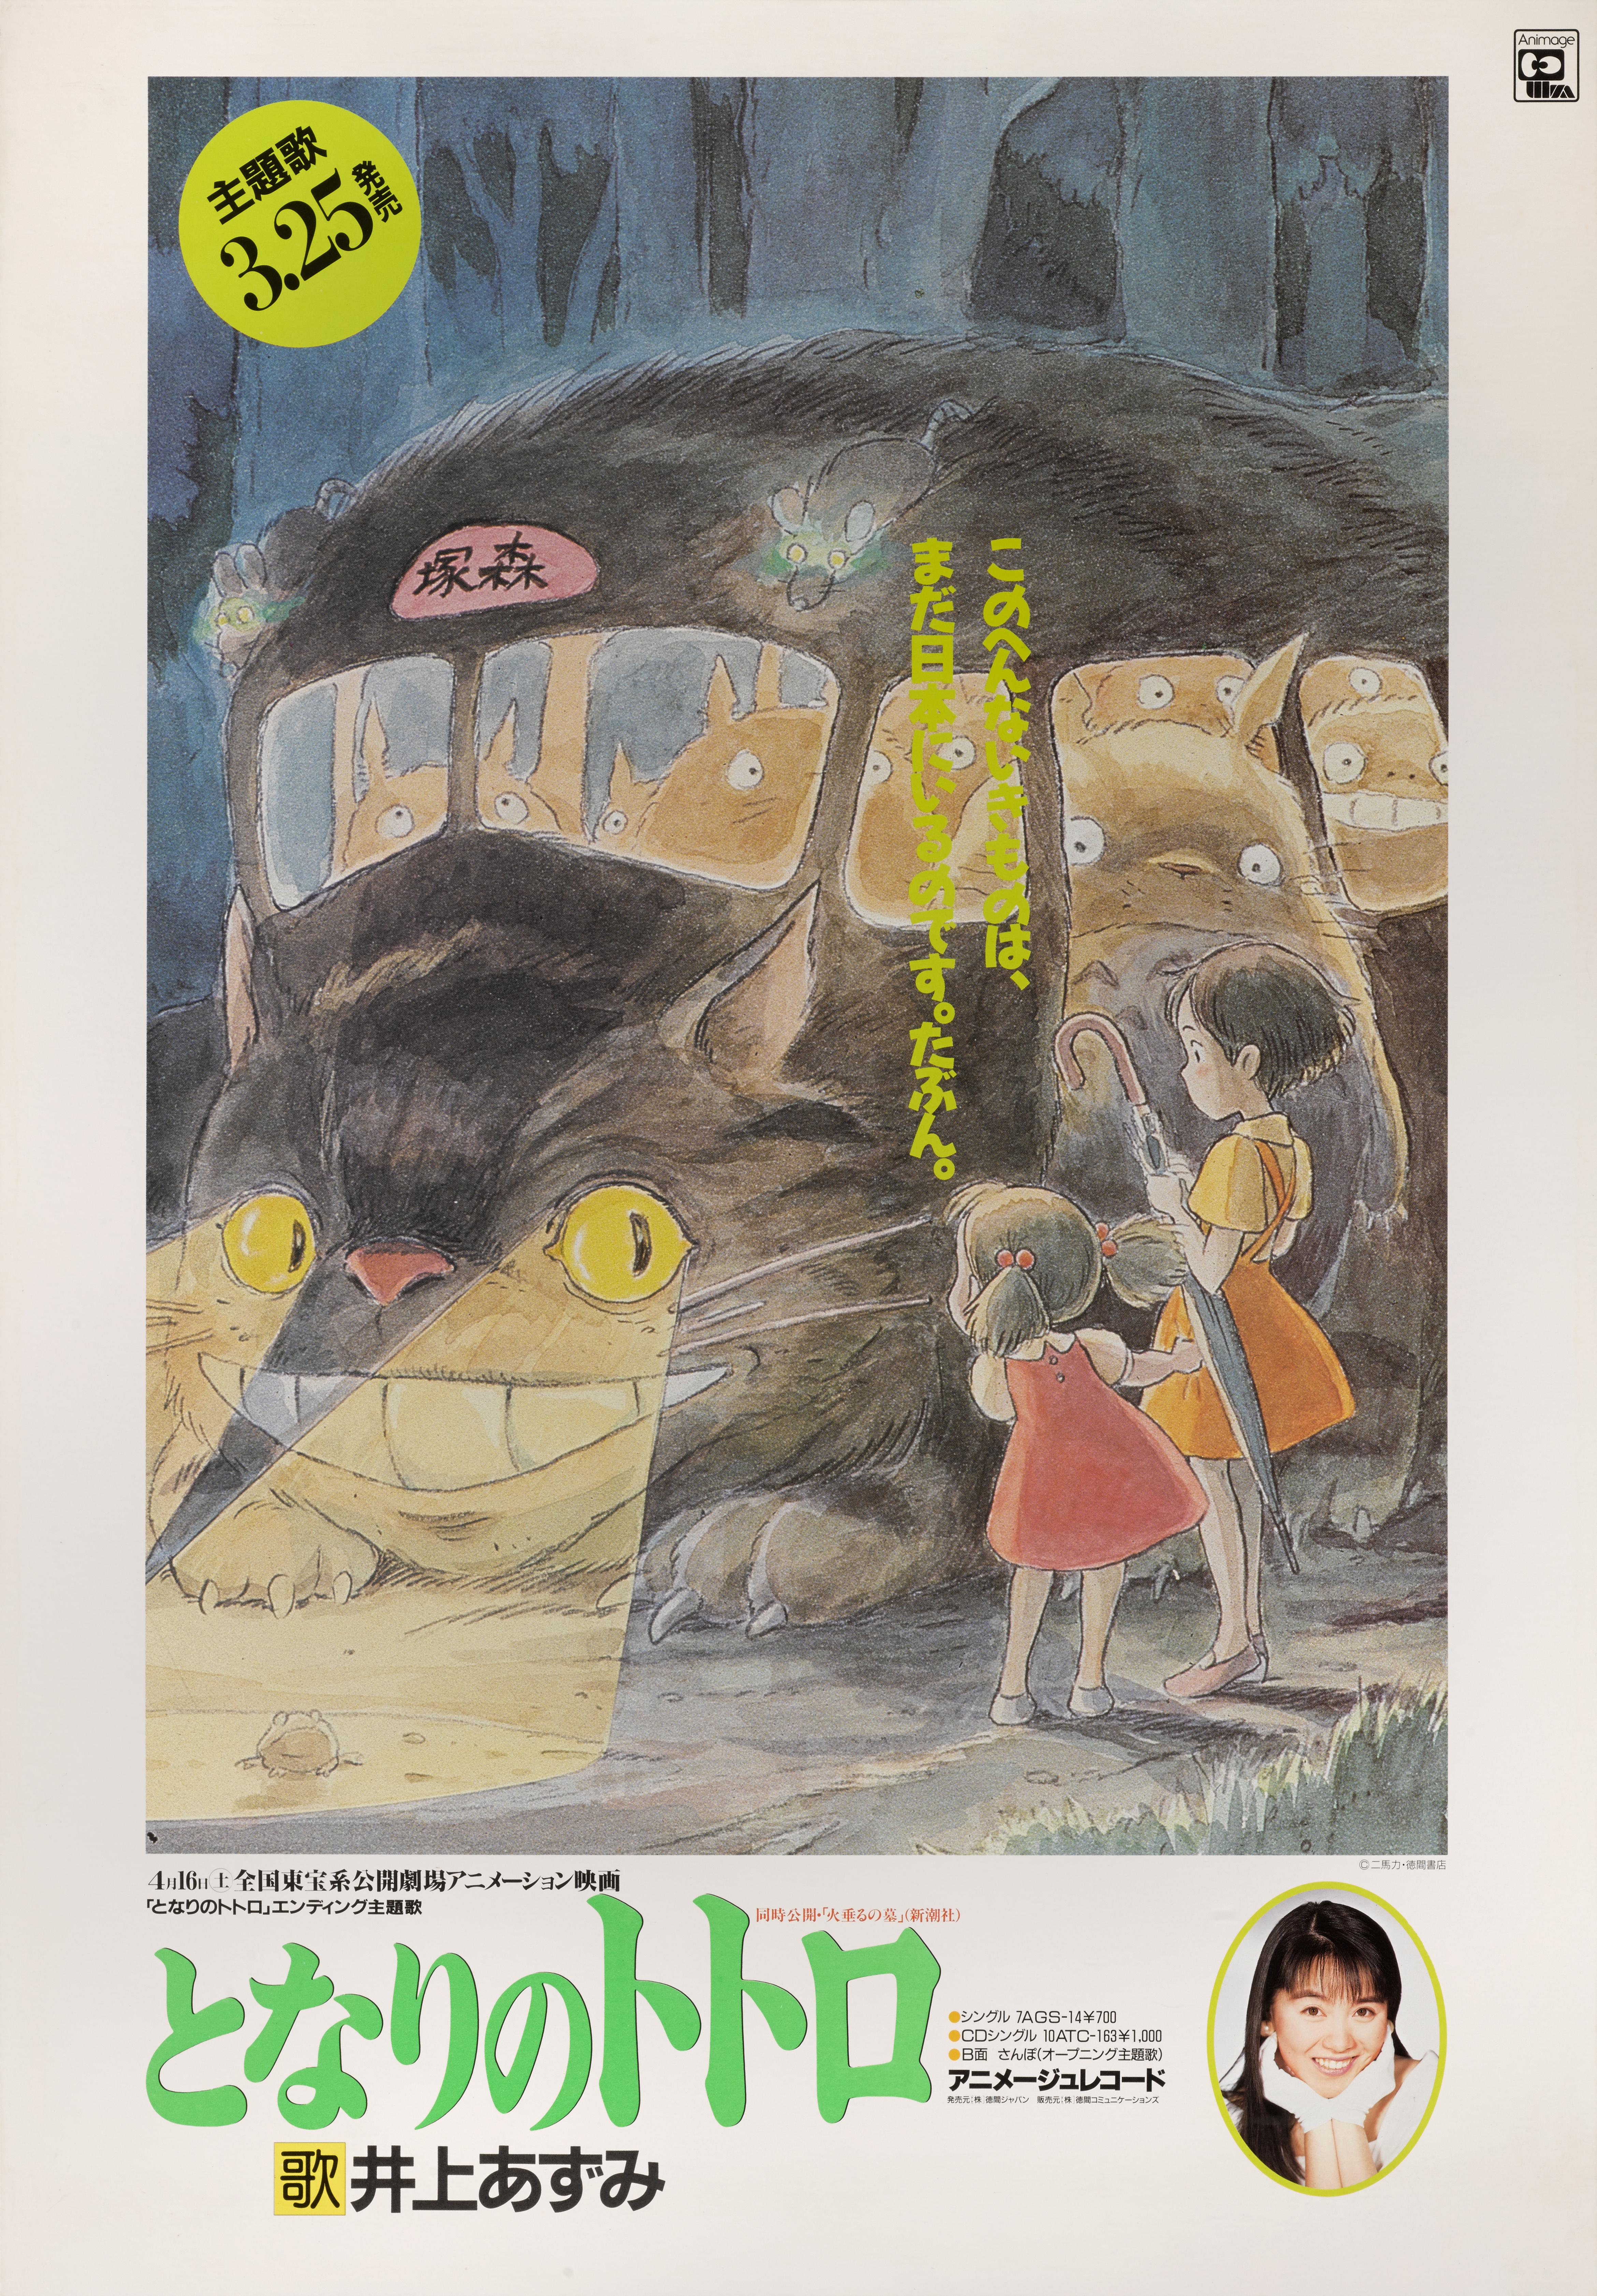 Original Japanese film poster for the 1988 studio Ghibli animation.
Hayao Miyazaki, one of the founders of Studio Ghibli, wrote and directed this film. Studio Ghibli, which was founded in 1985, has been responsible for making so many magical